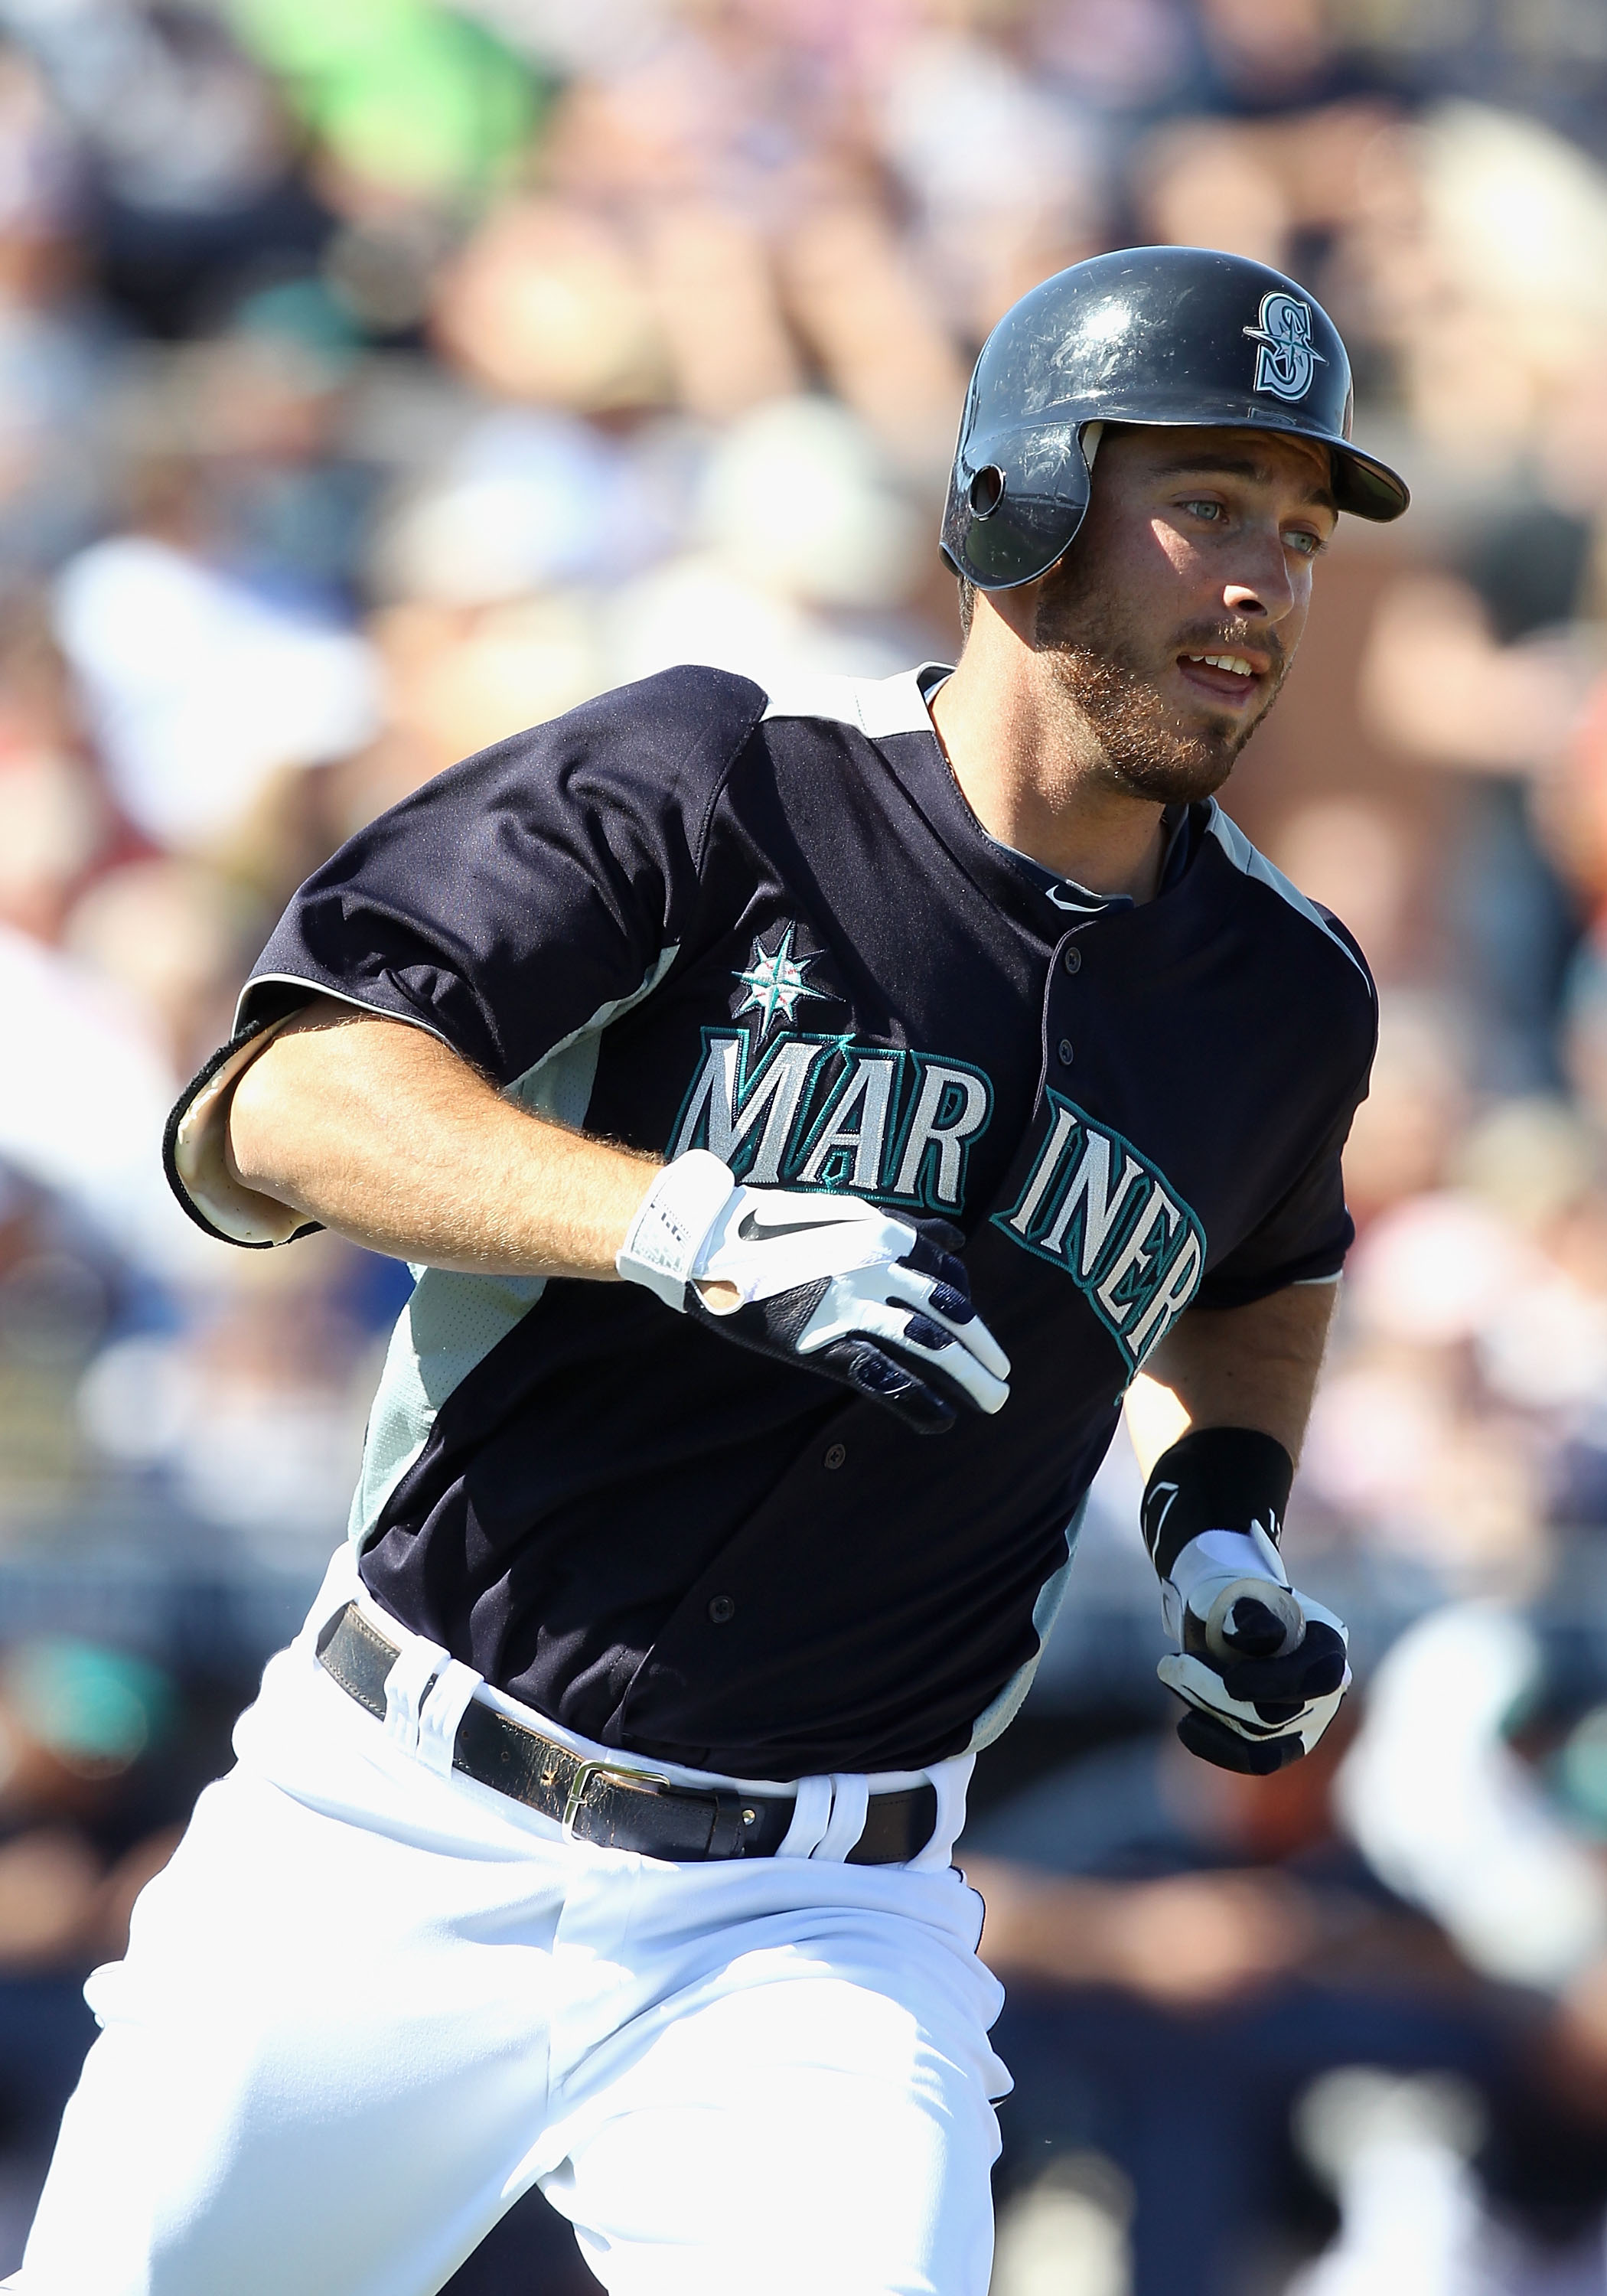 Seattle Mariners Call Up Top Prospect Dustin Ackley - MLB Daily Dish